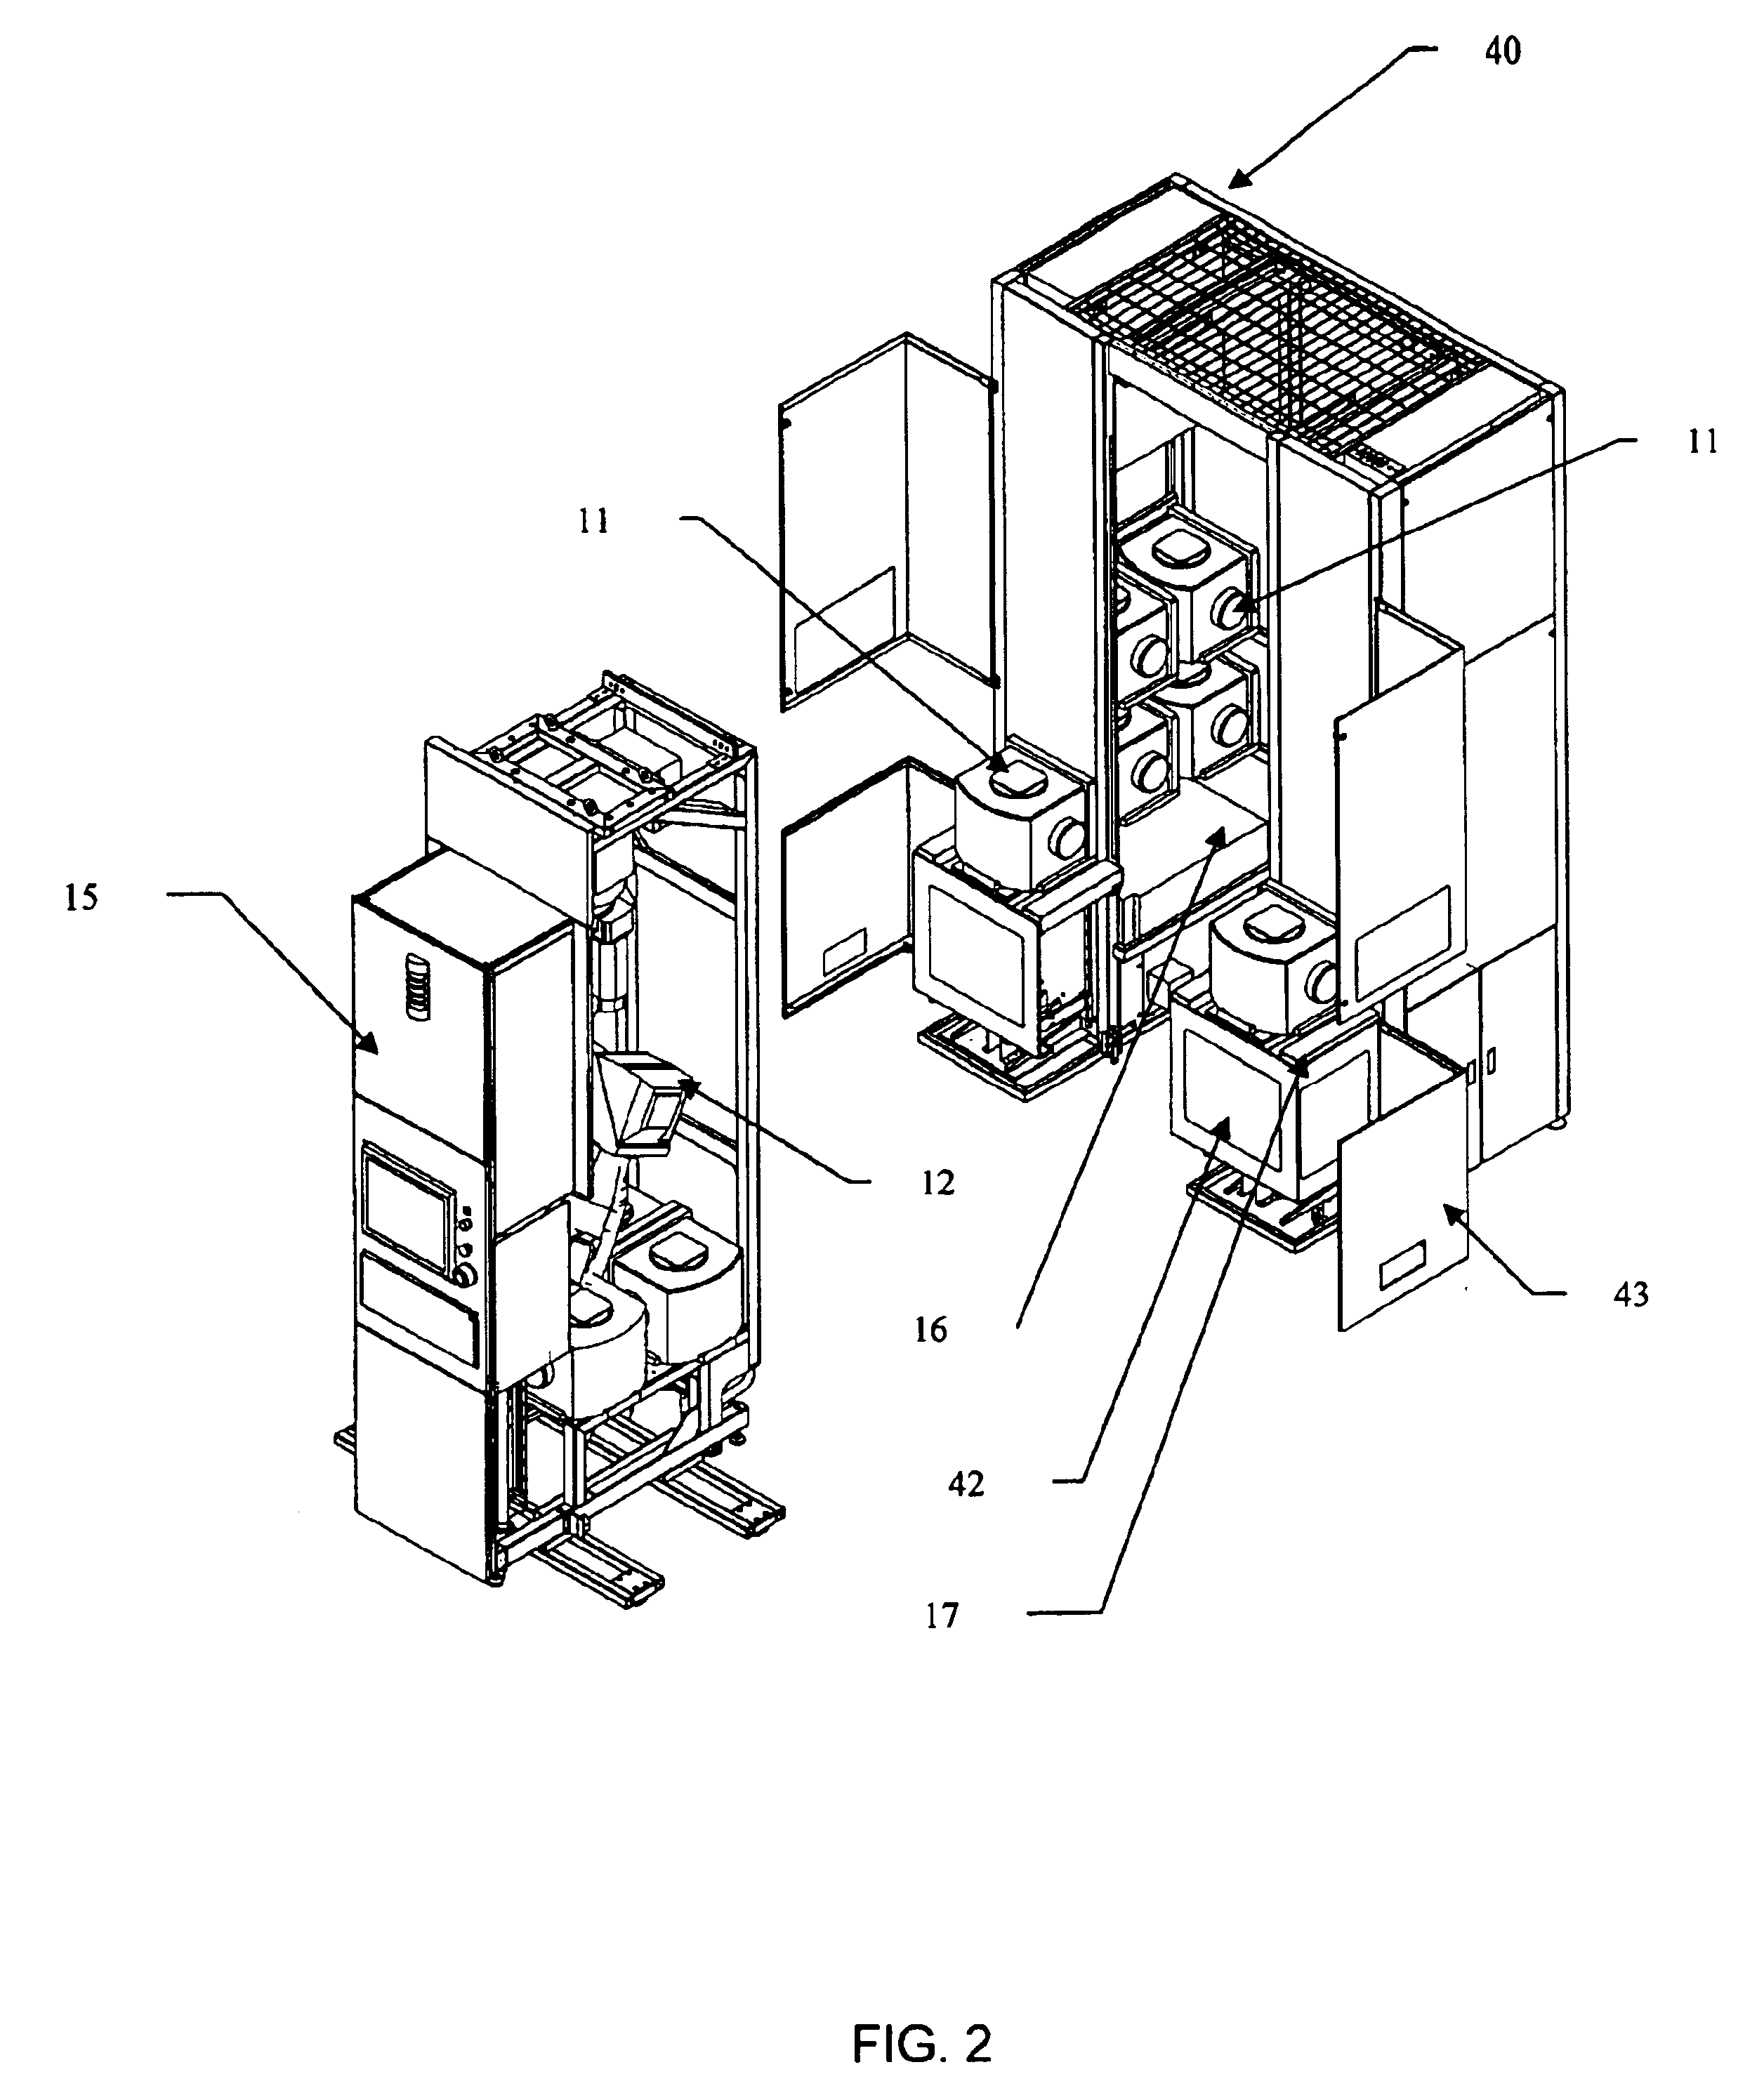 Robotic storage buffer system for substrate carrier pods